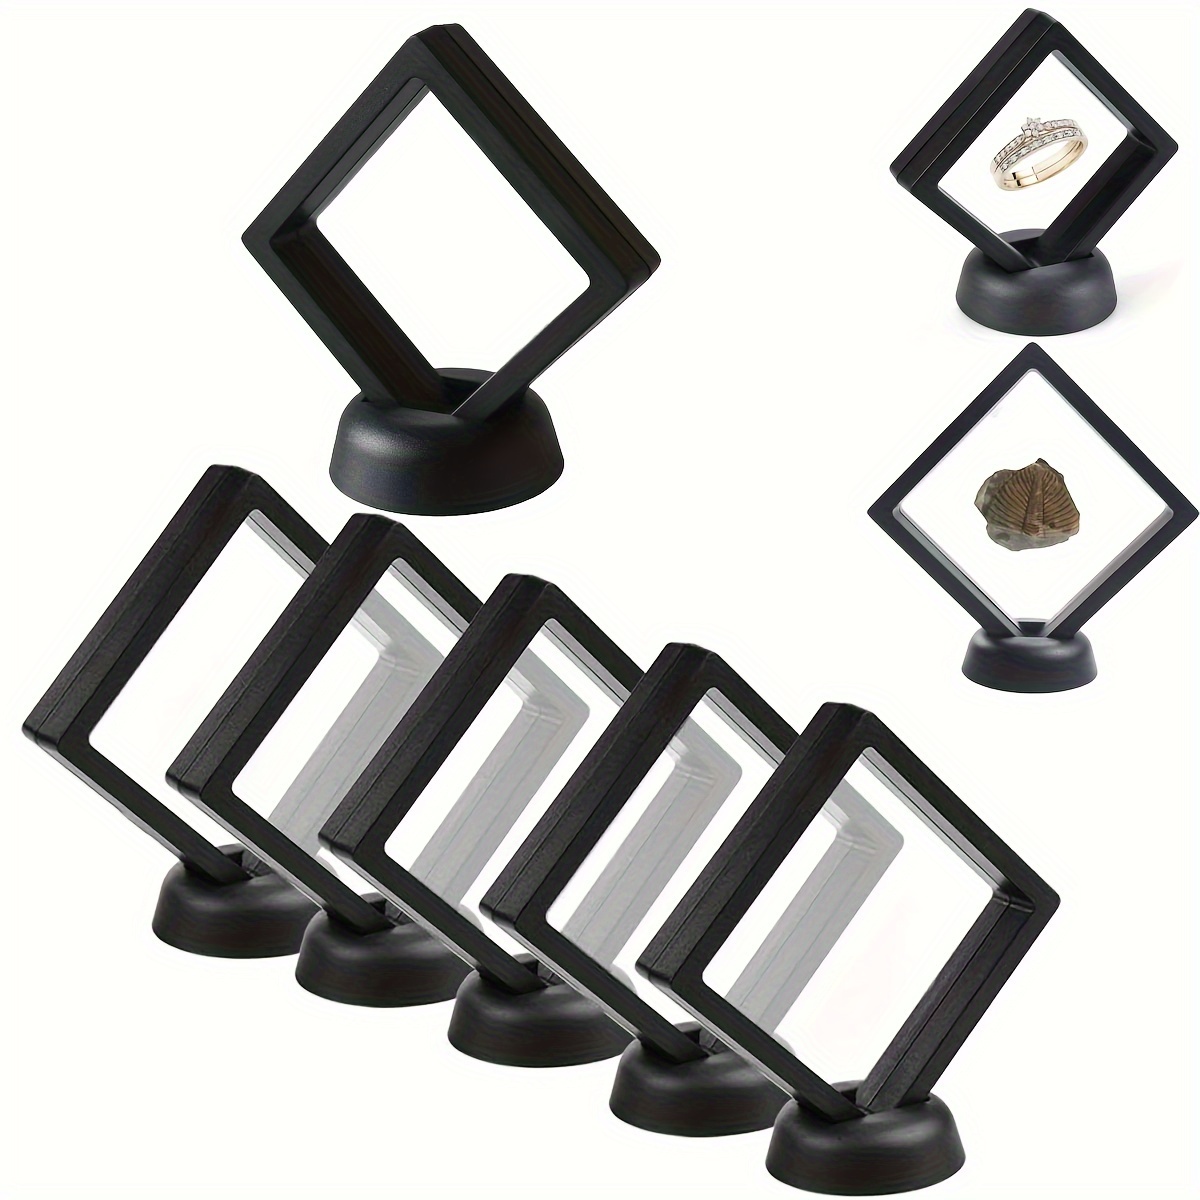 

6-piece 3d Floating Display Frames With Diamond Shape & Round Bases - Perfect For Medals, Jewelry, Coins & More